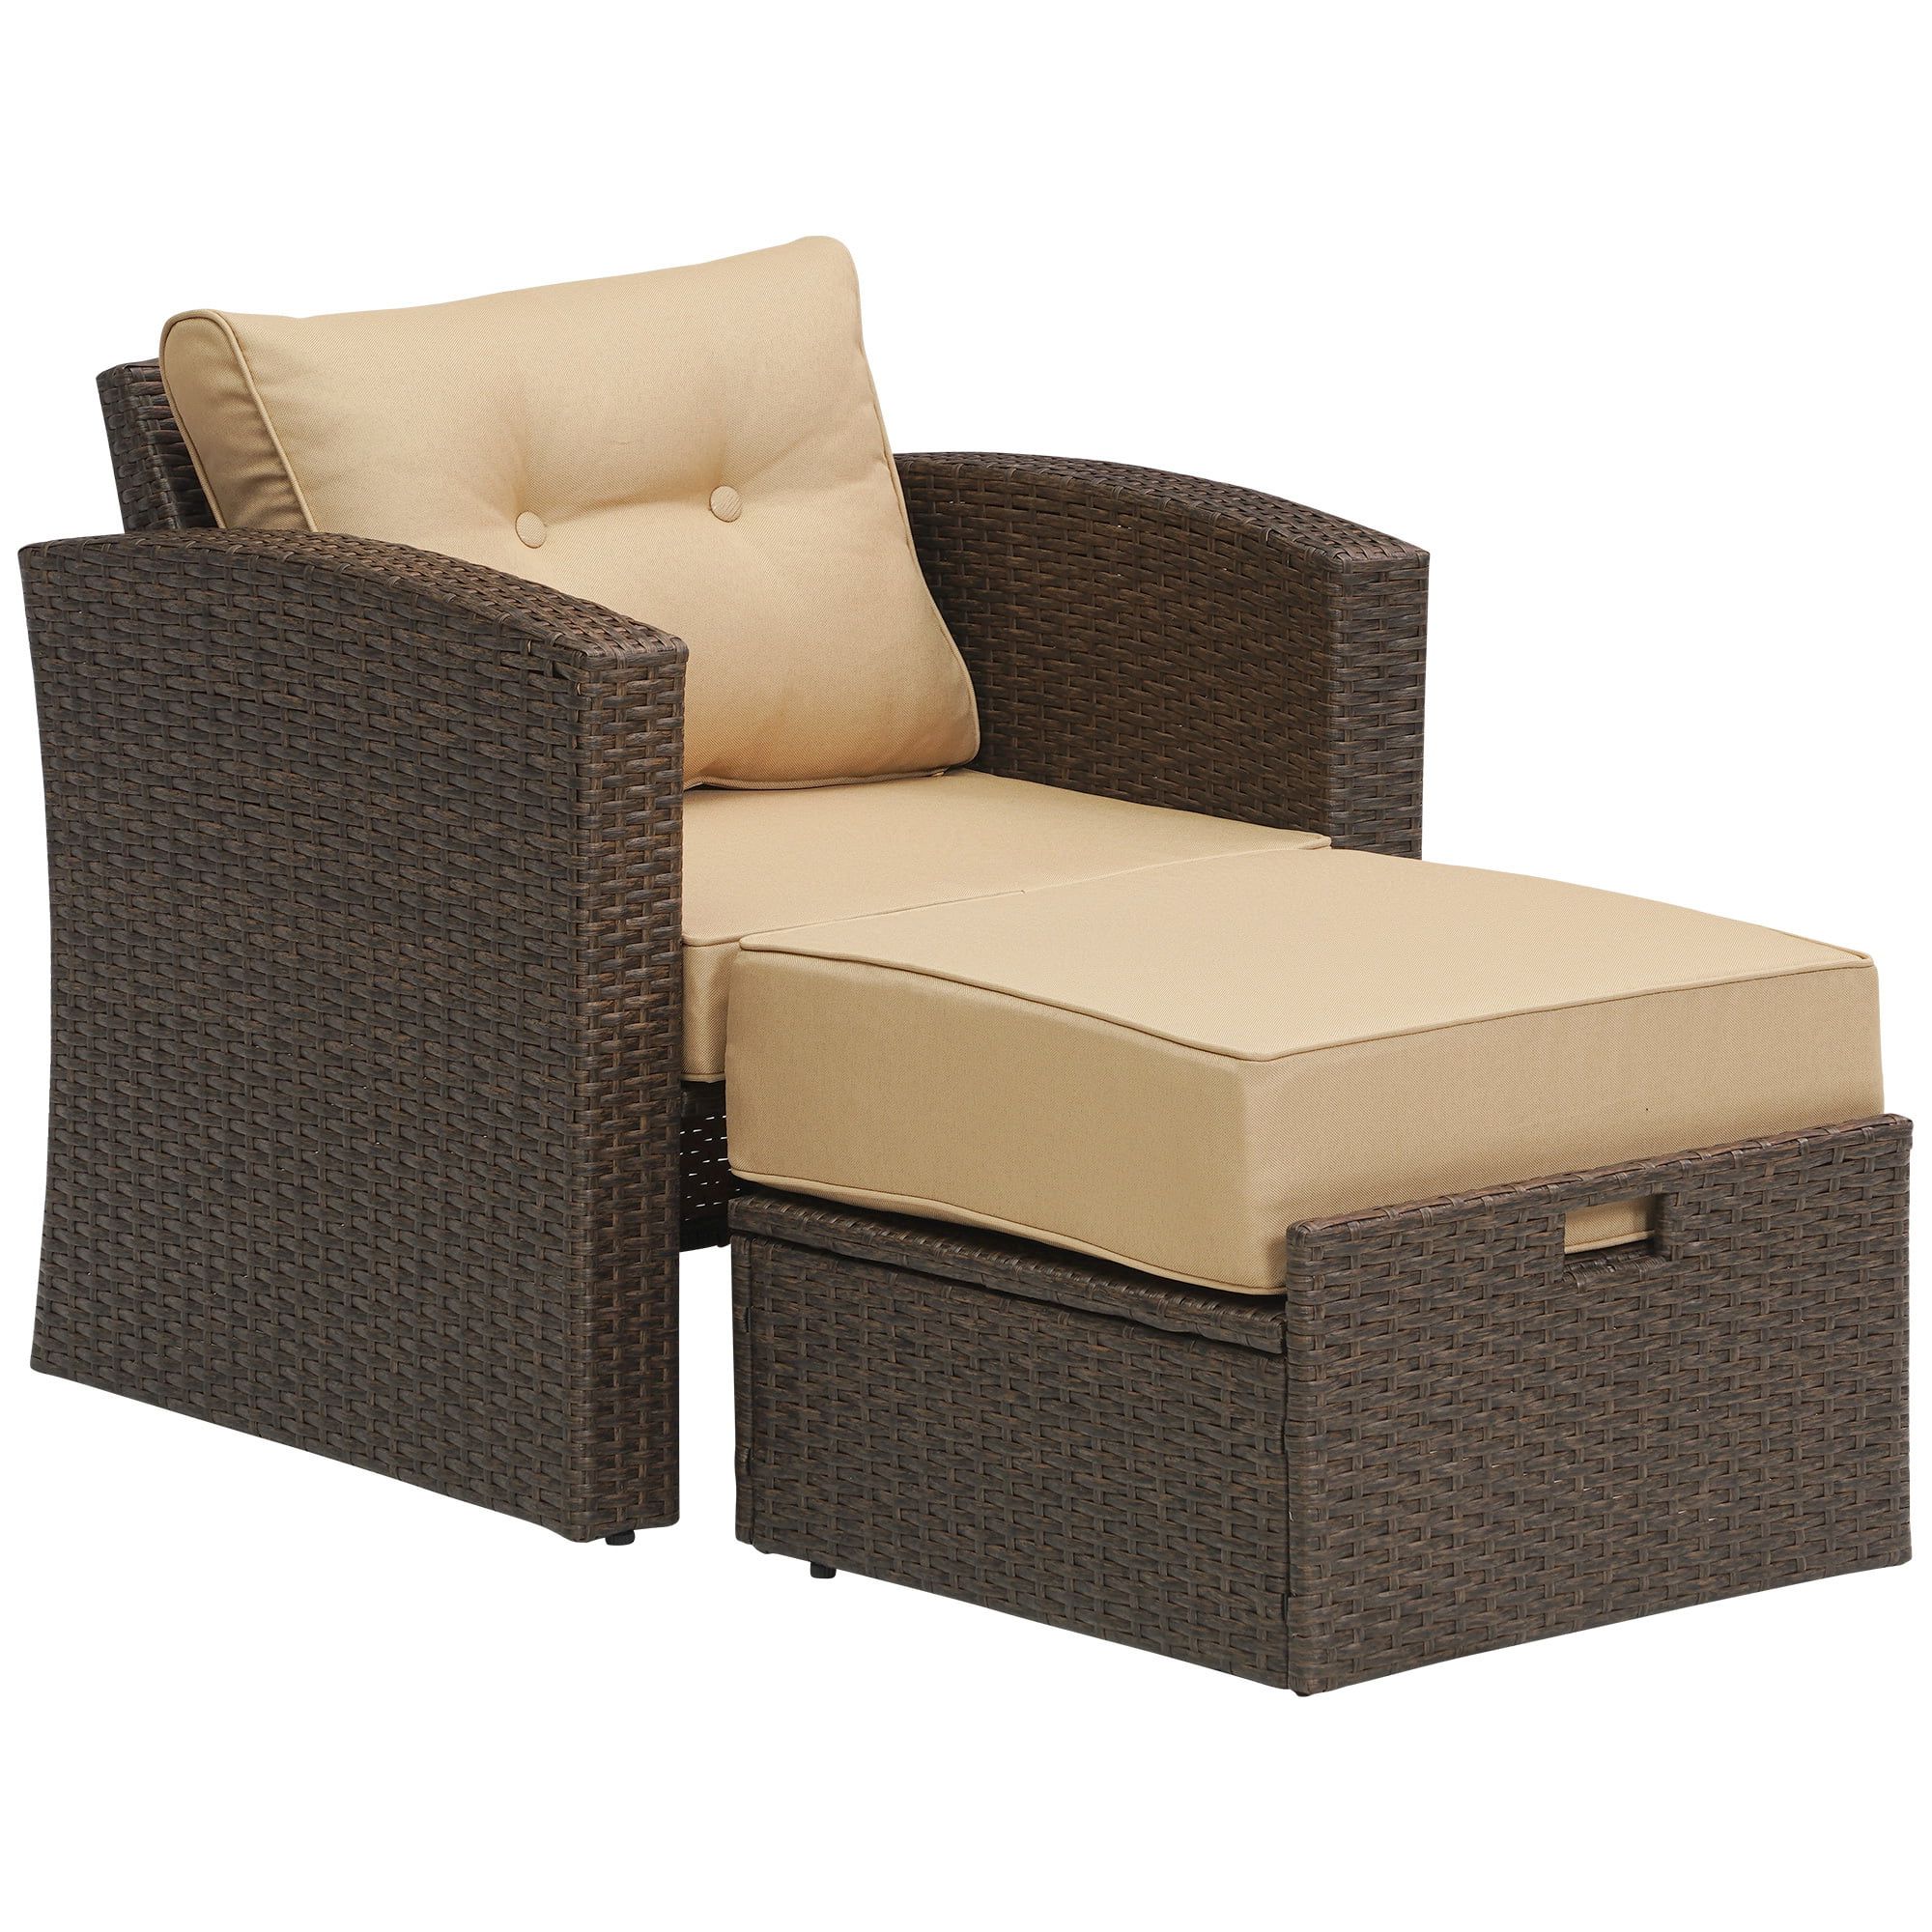 Outdoor Wicker Furniture Single Chair With Ottoman,brown Rattan Outdoor  Armchair Sofa Set With Beige Cushions,aluminum Frame – Walmart Within Most Up To Date Brown Wicker Chairs With Ottoman (View 9 of 15)